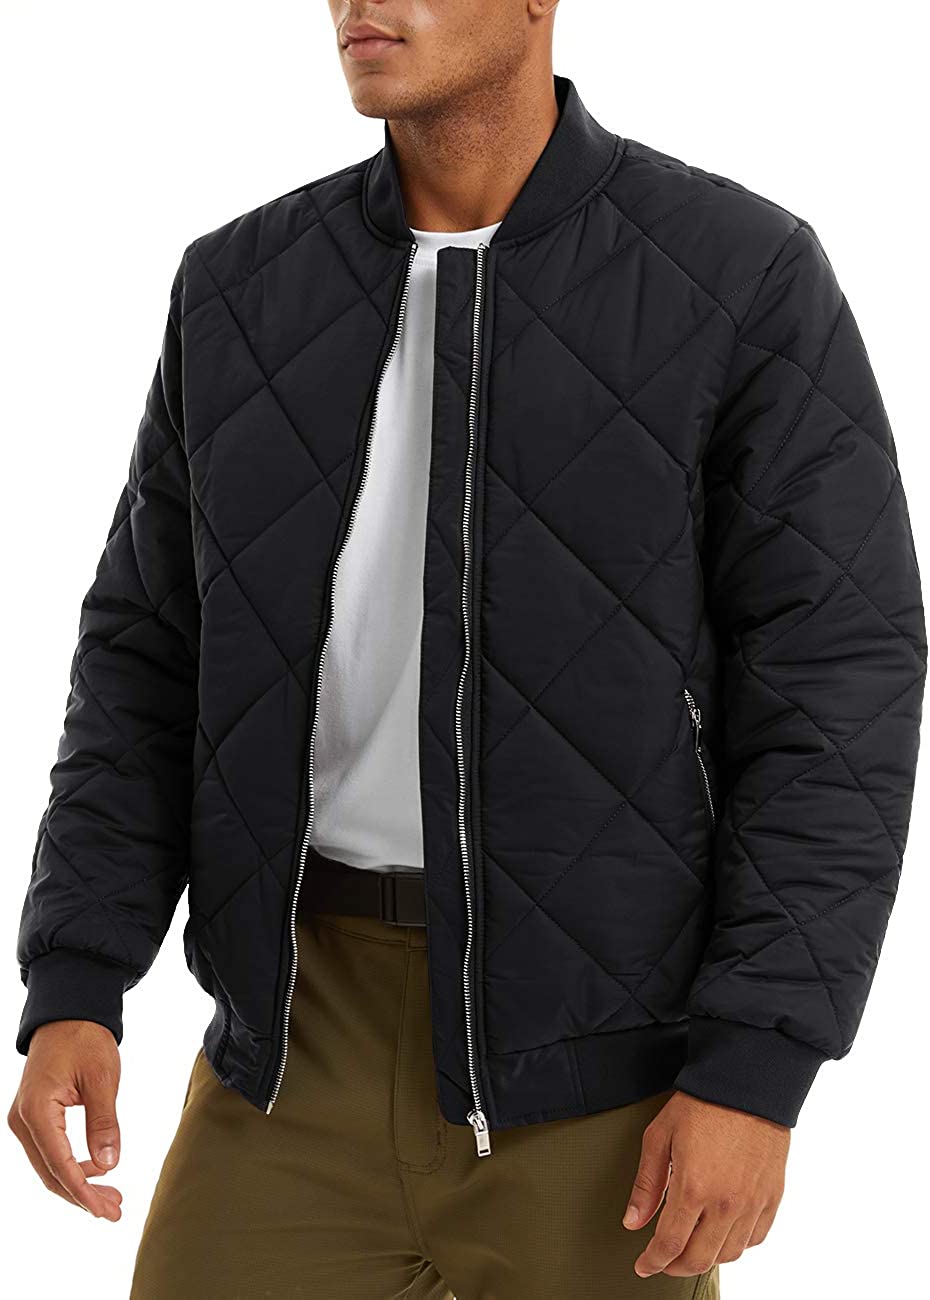 MAGNIVIT Men's Bomber Jacket Winter Fall Quilted Puffer Jacket Warm ...